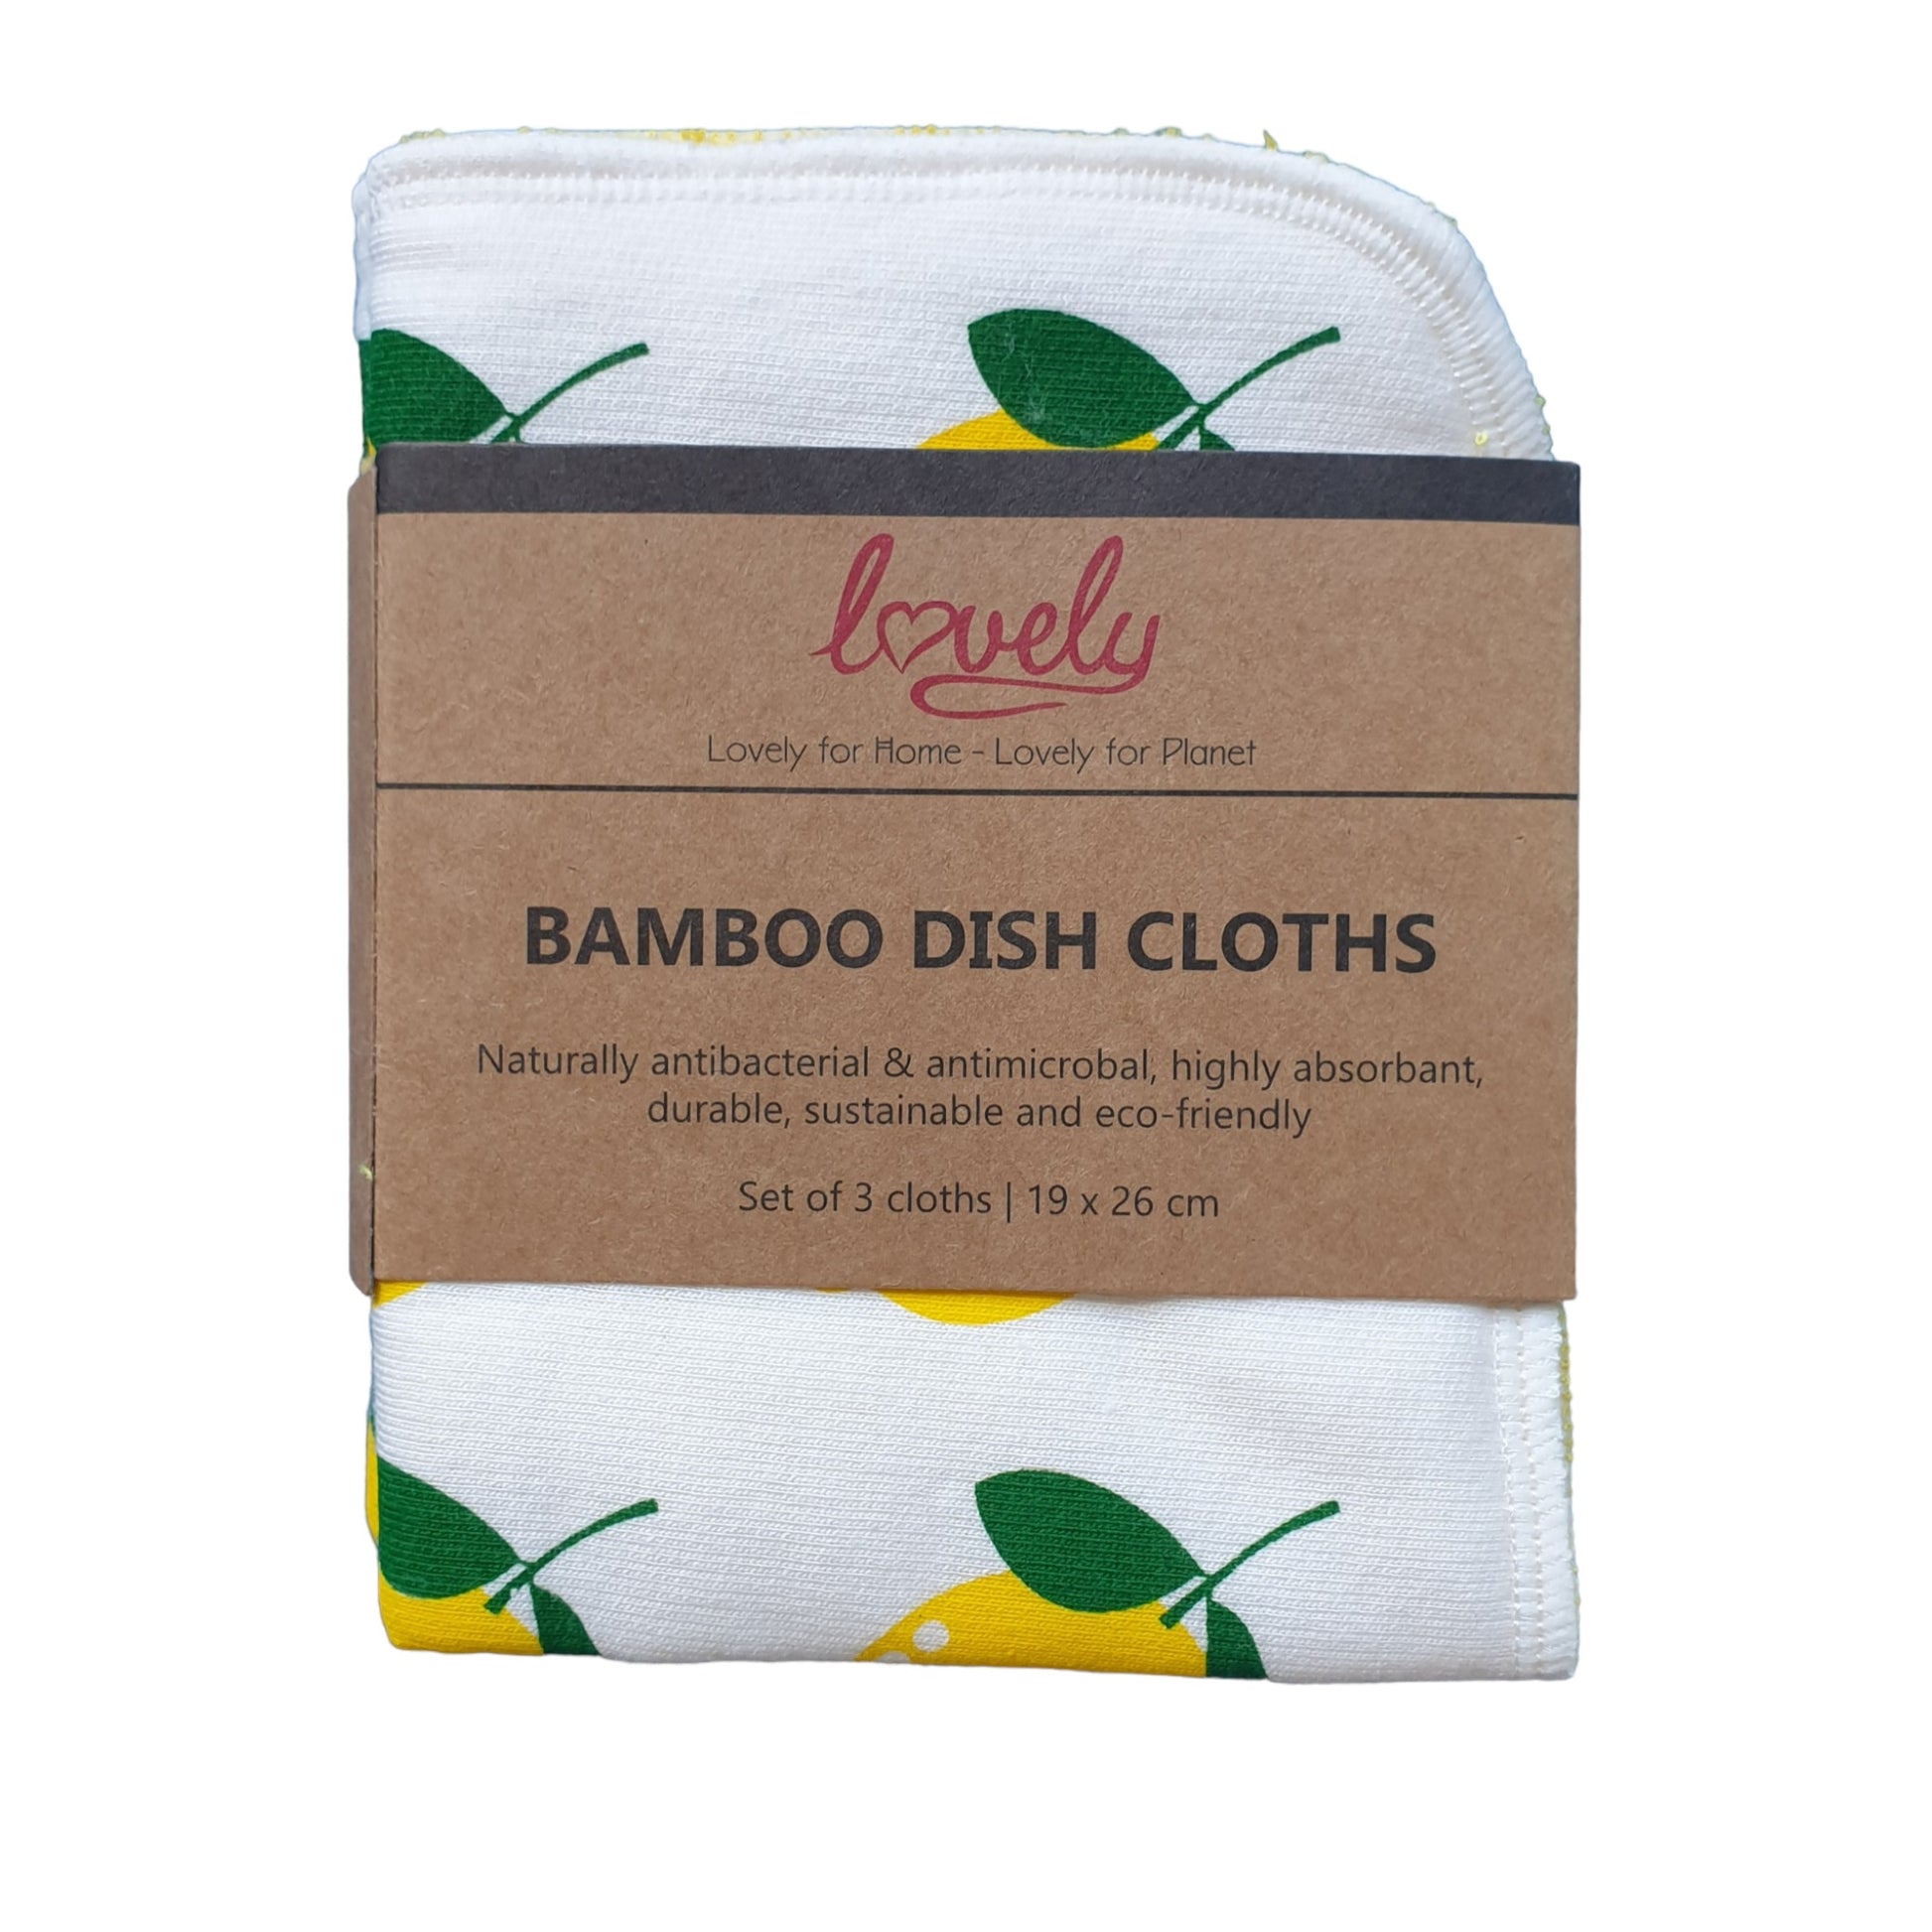 Bamboo Dish Cloths,  Eco-Friendly,Non-Scratch,Lint-Free,Quick-Dry,Re-Usable,CleaningTowel Pack  of 6 (Medium Ducky 9x7inch, Modern Grey/White)